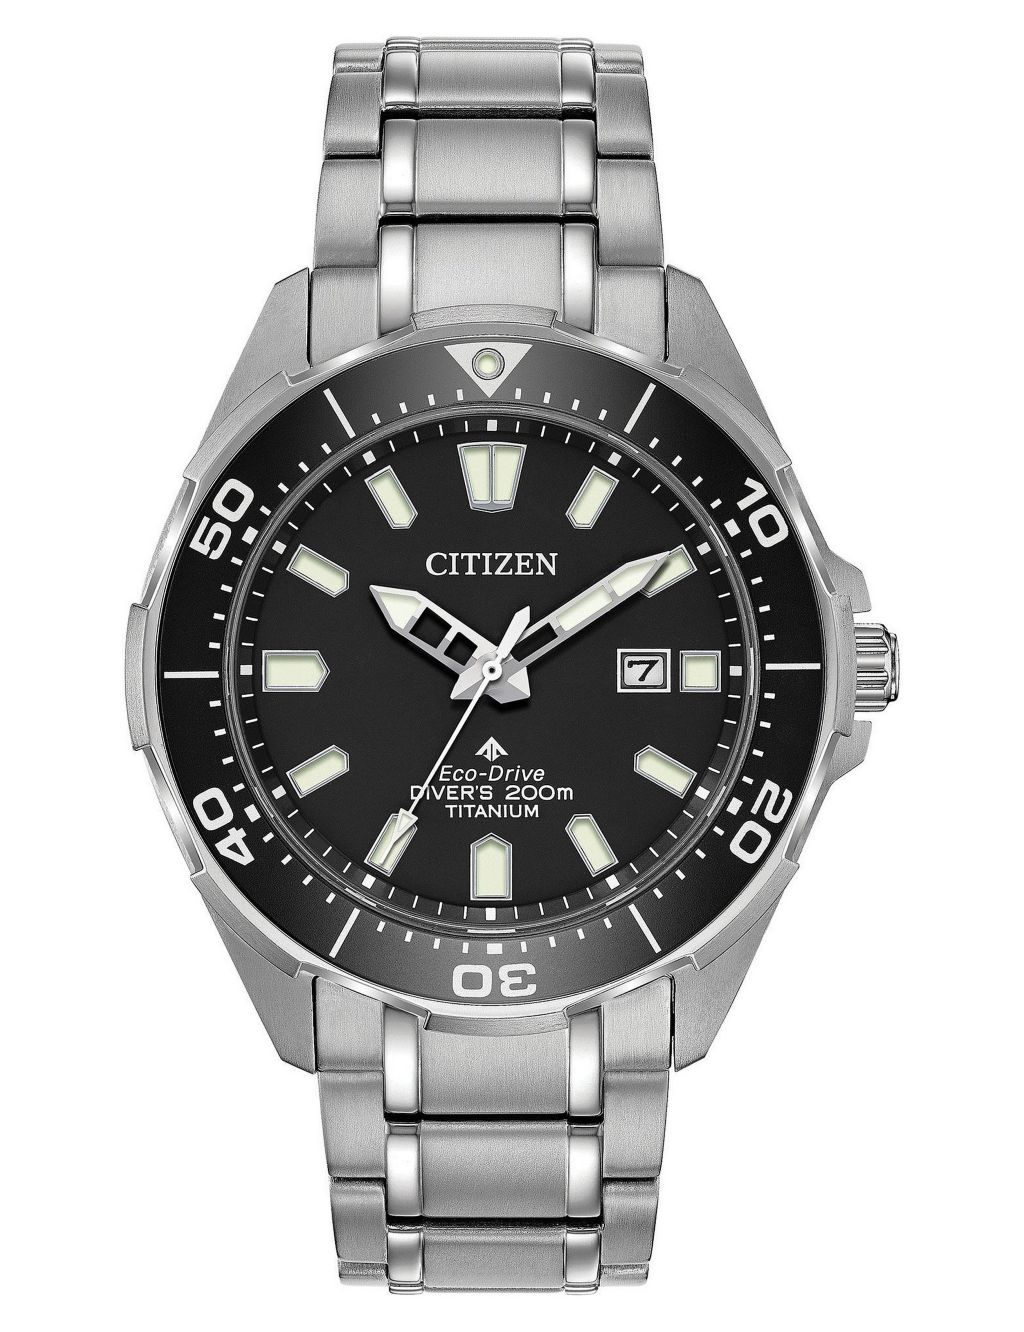 Citizen Titanium Promaster Diver Eco-Drive Stainless Steel Watch image 1